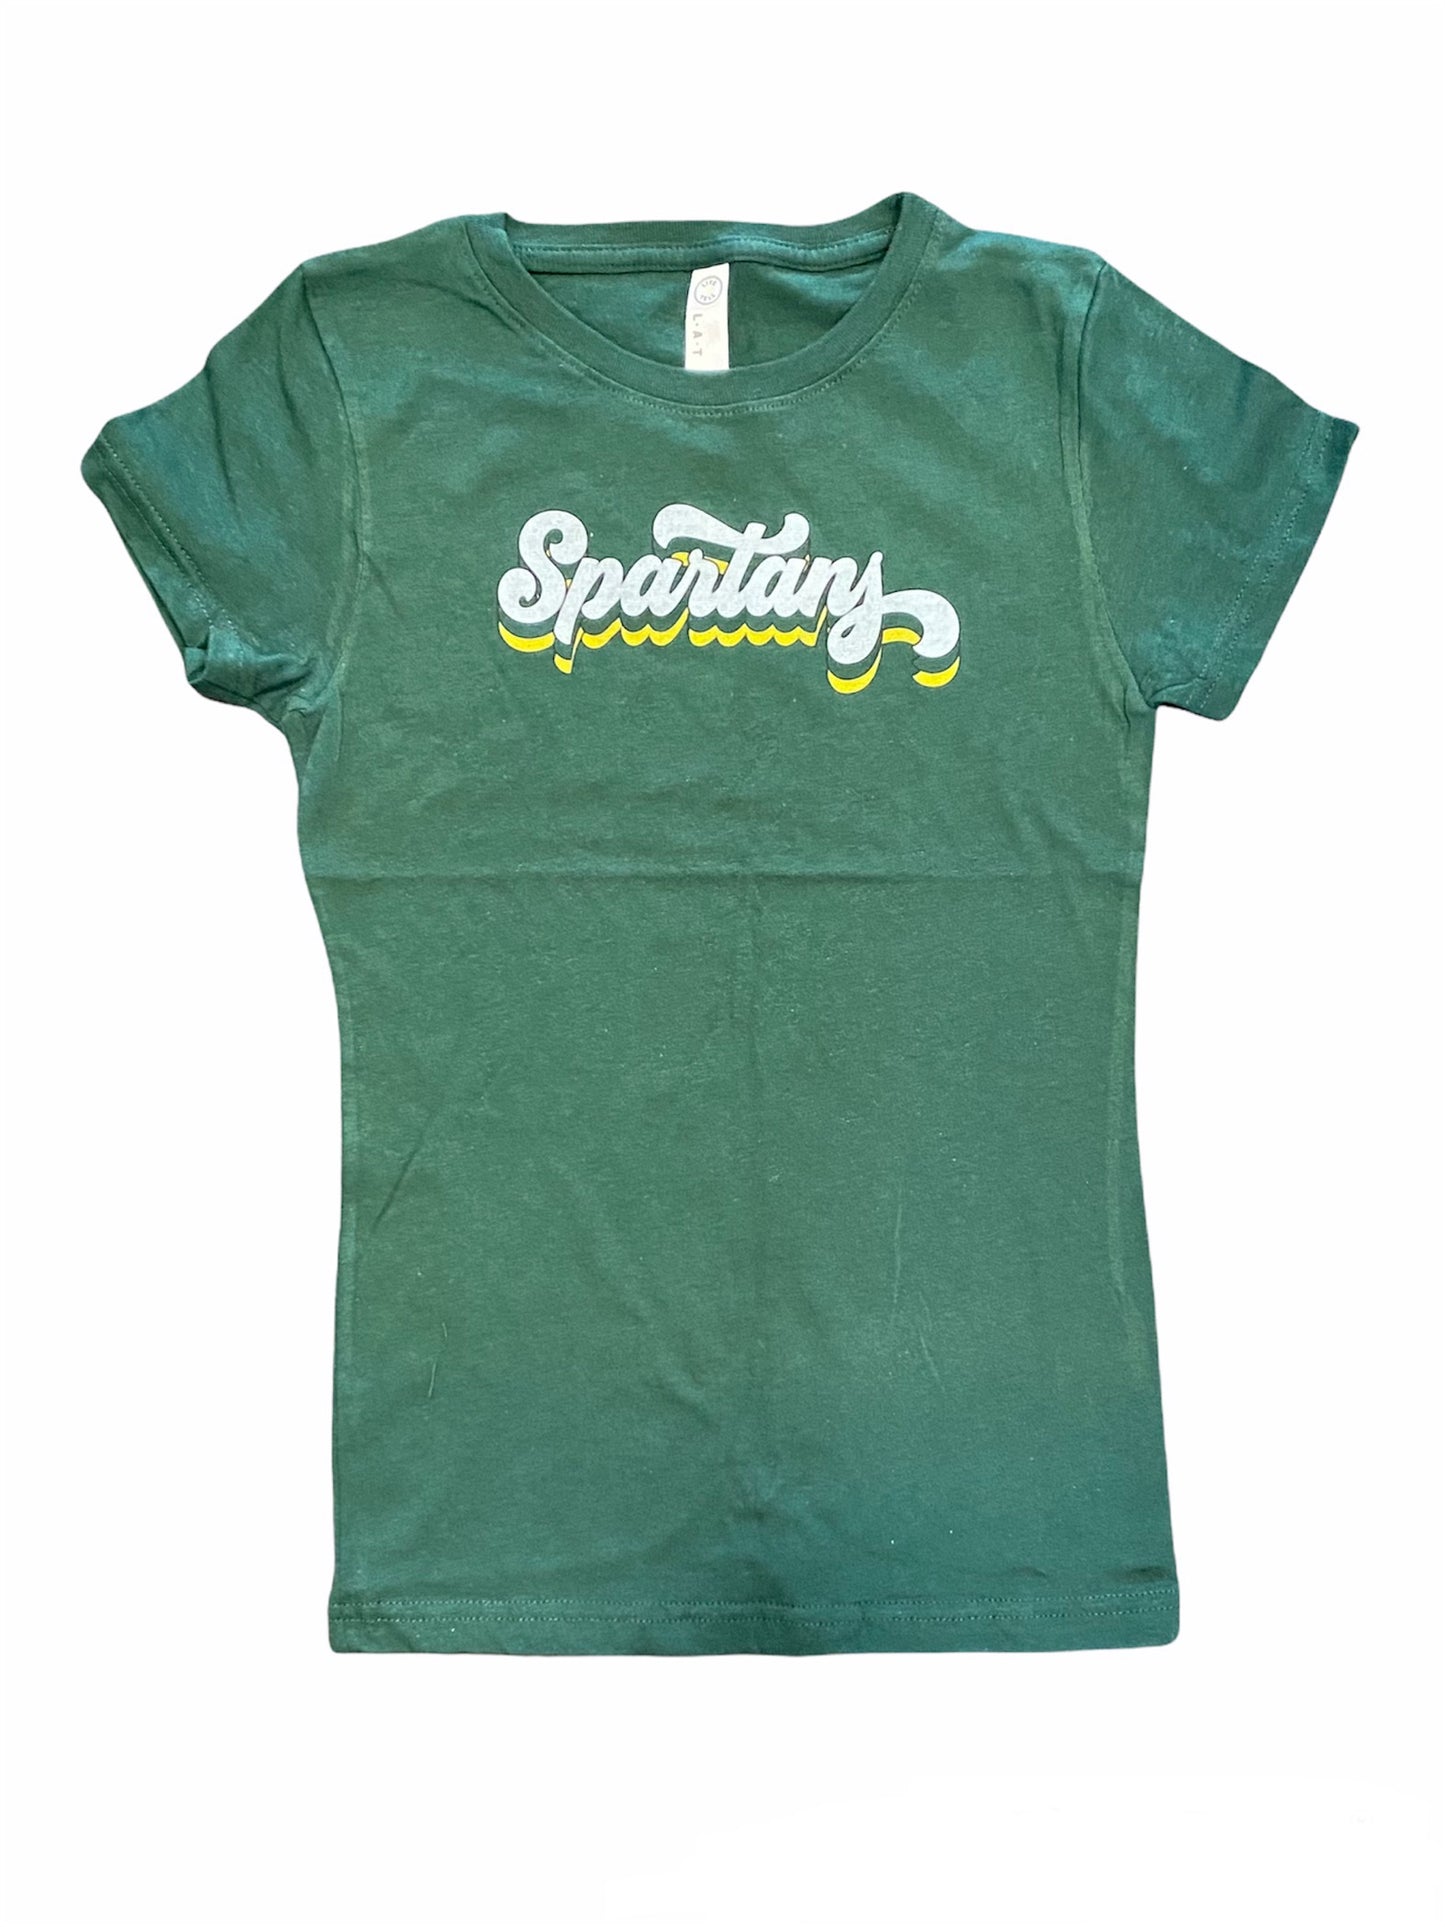 Forest Green Spartans Tee